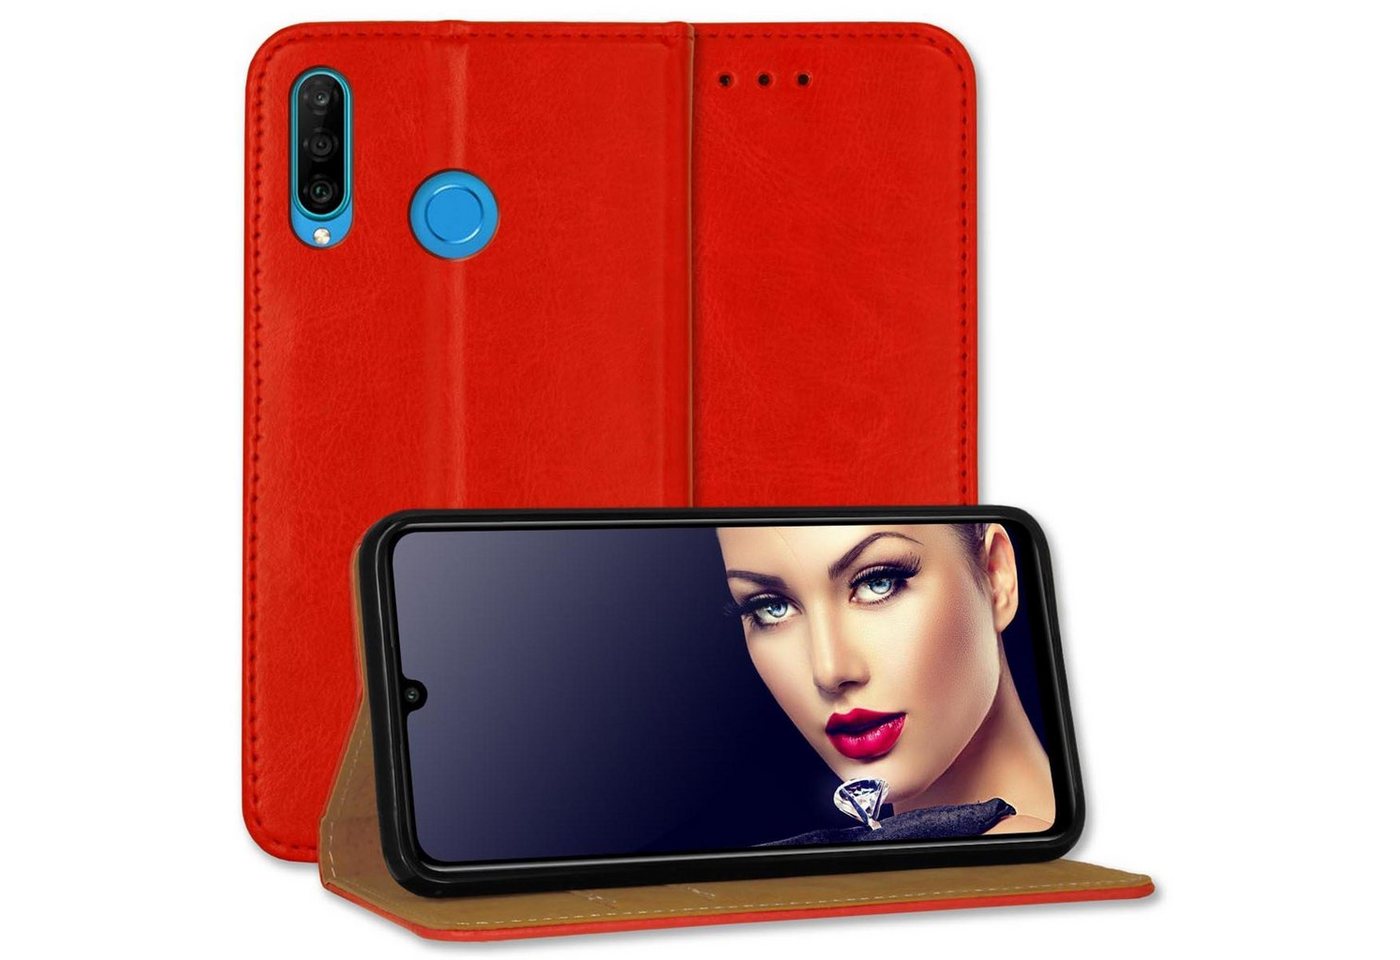 mtb more energy Smartphone-Hülle Bookstyle Business - Farbe rot, für: Huawei P30 Lite / P30 Lite New Edition (6.15) von mtb more energy